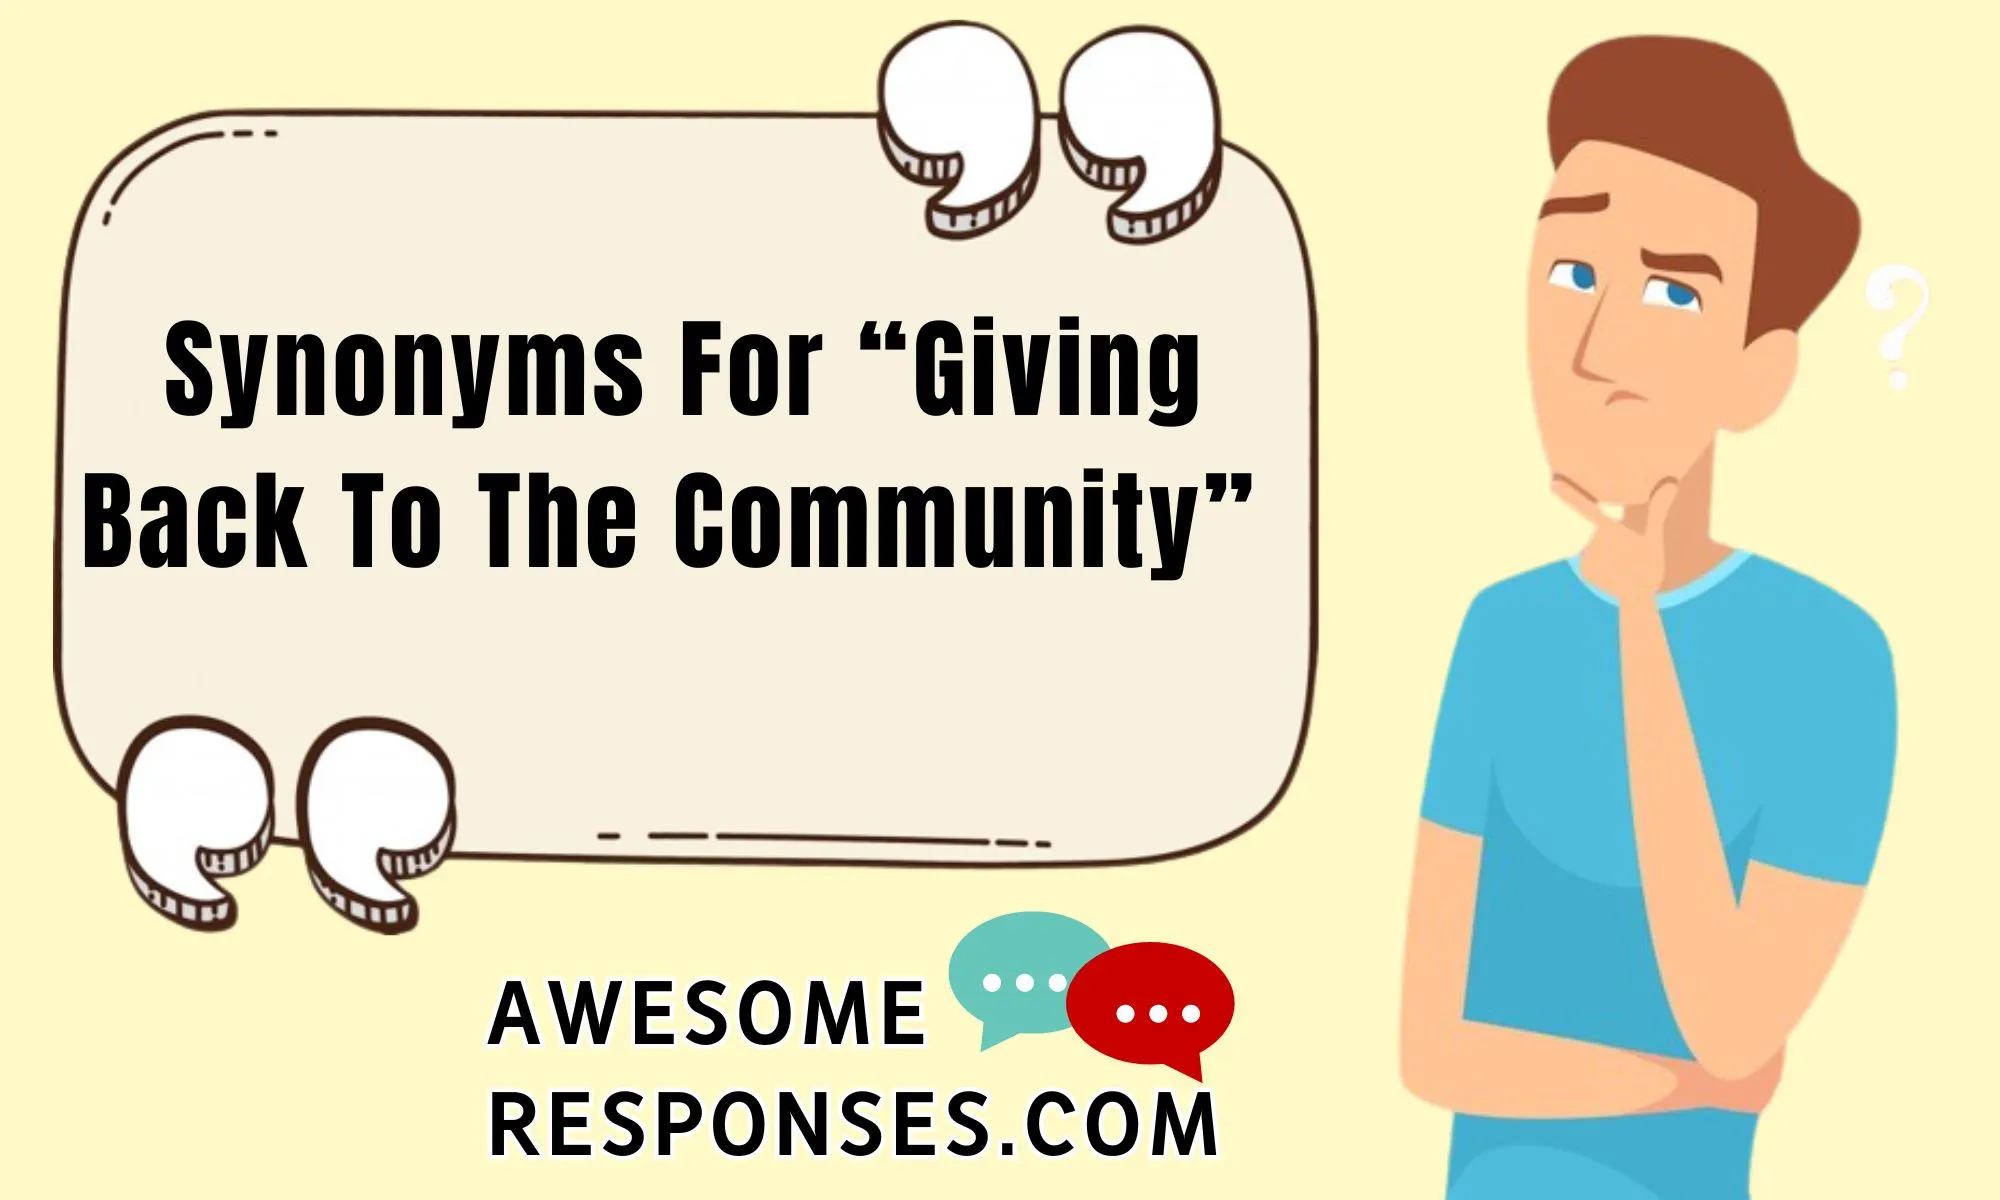 Synonyms For “Giving Back To The Community”